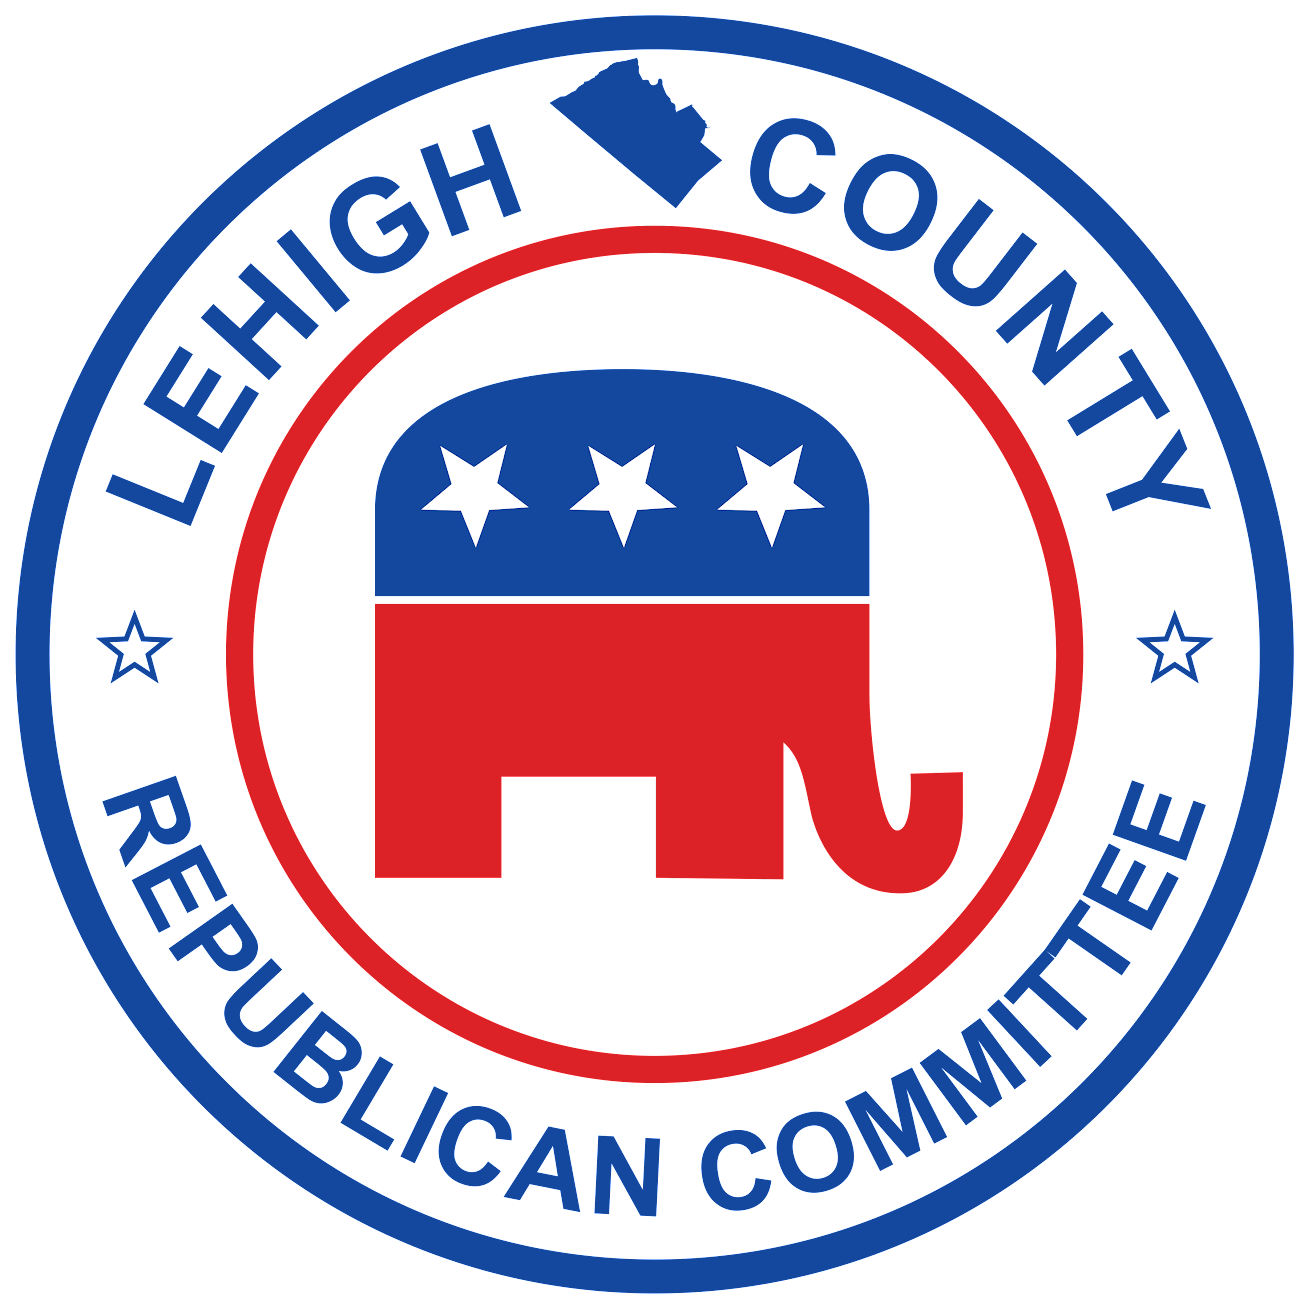 Lehigh County Republican Committee